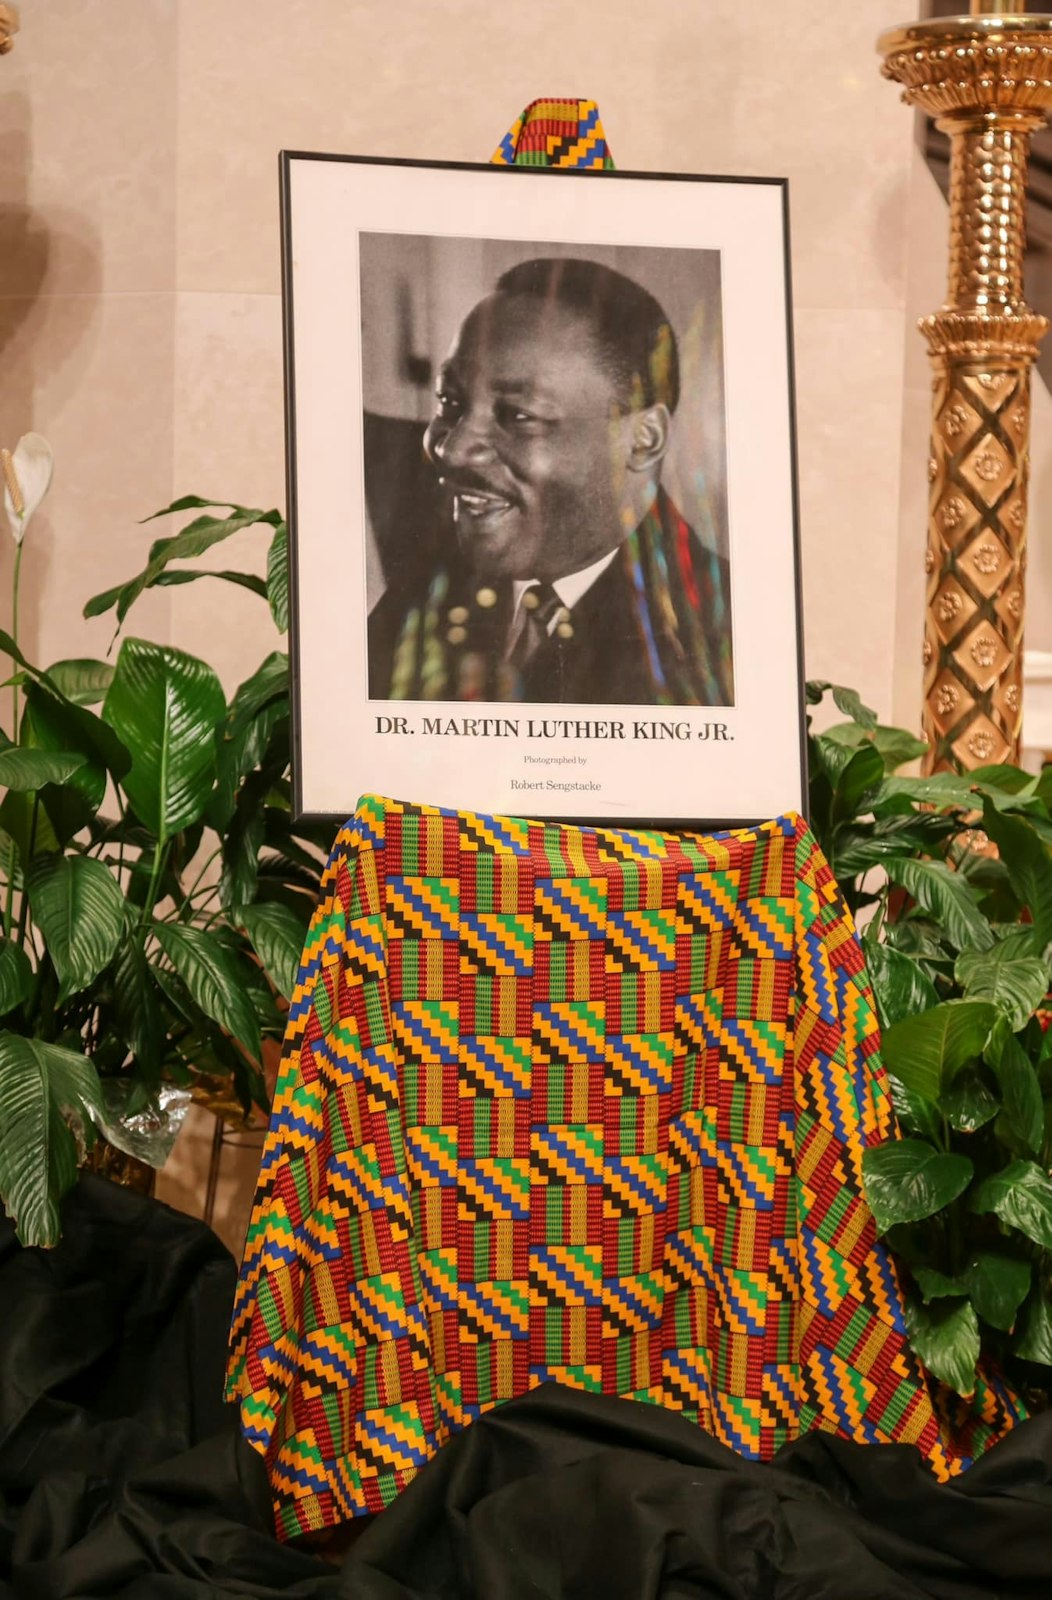 A photograph of the Rev. Martin Luther King Jr. is displayed at the Cathedral of the Most Blessed Sacrament during a special Mass for Justice and Peace on Jan. 16.